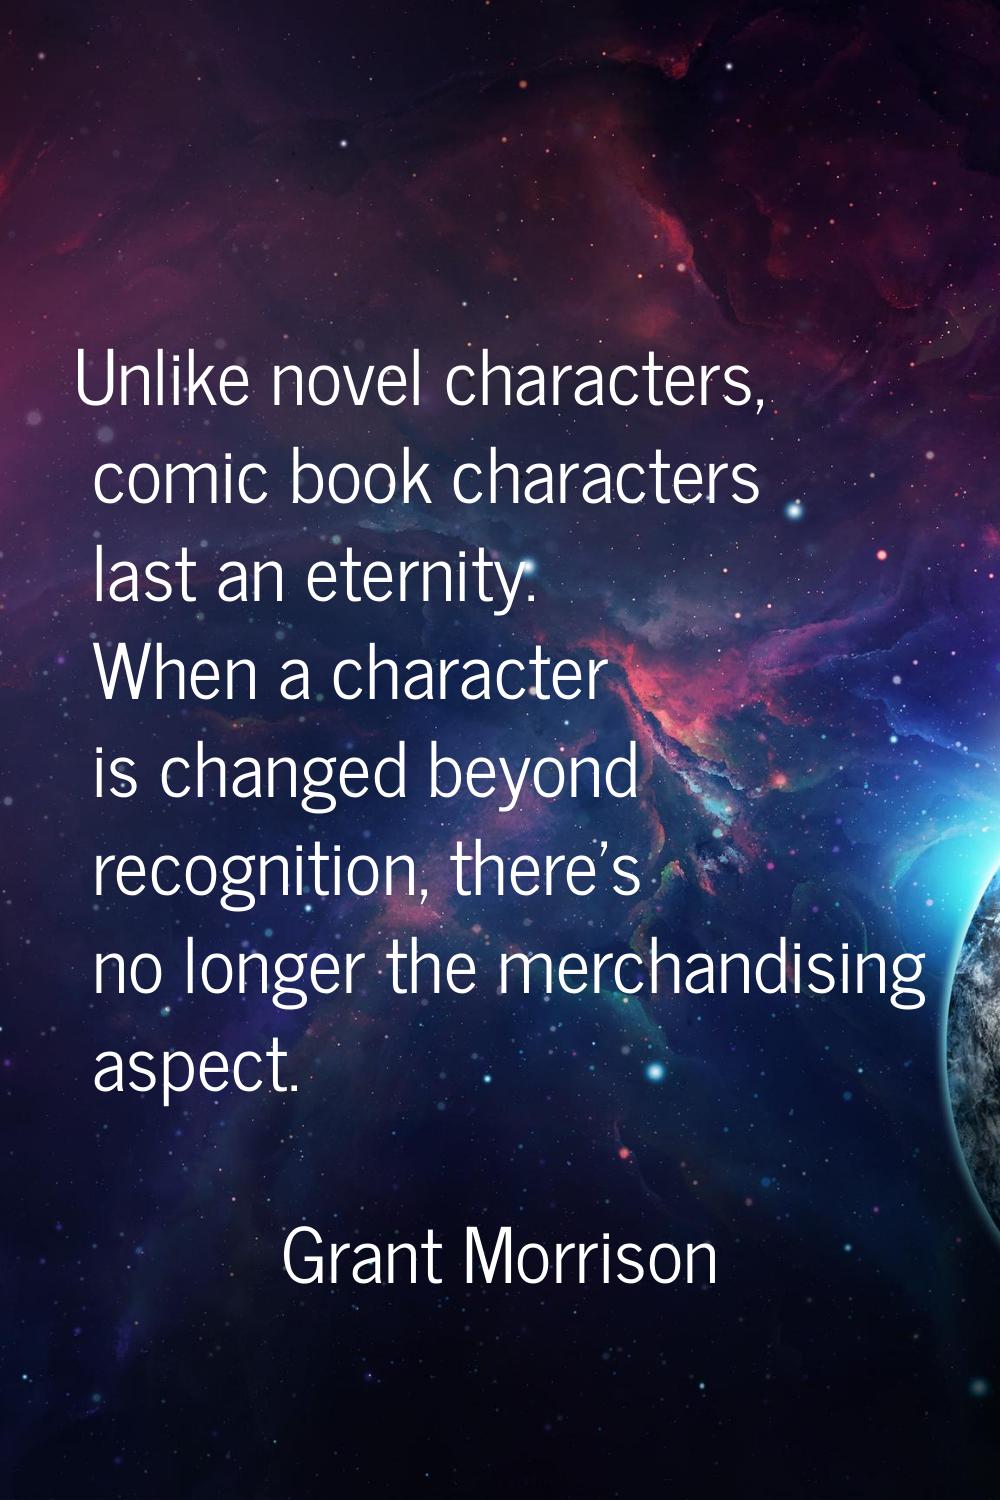 Unlike novel characters, comic book characters last an eternity. When a character is changed beyond